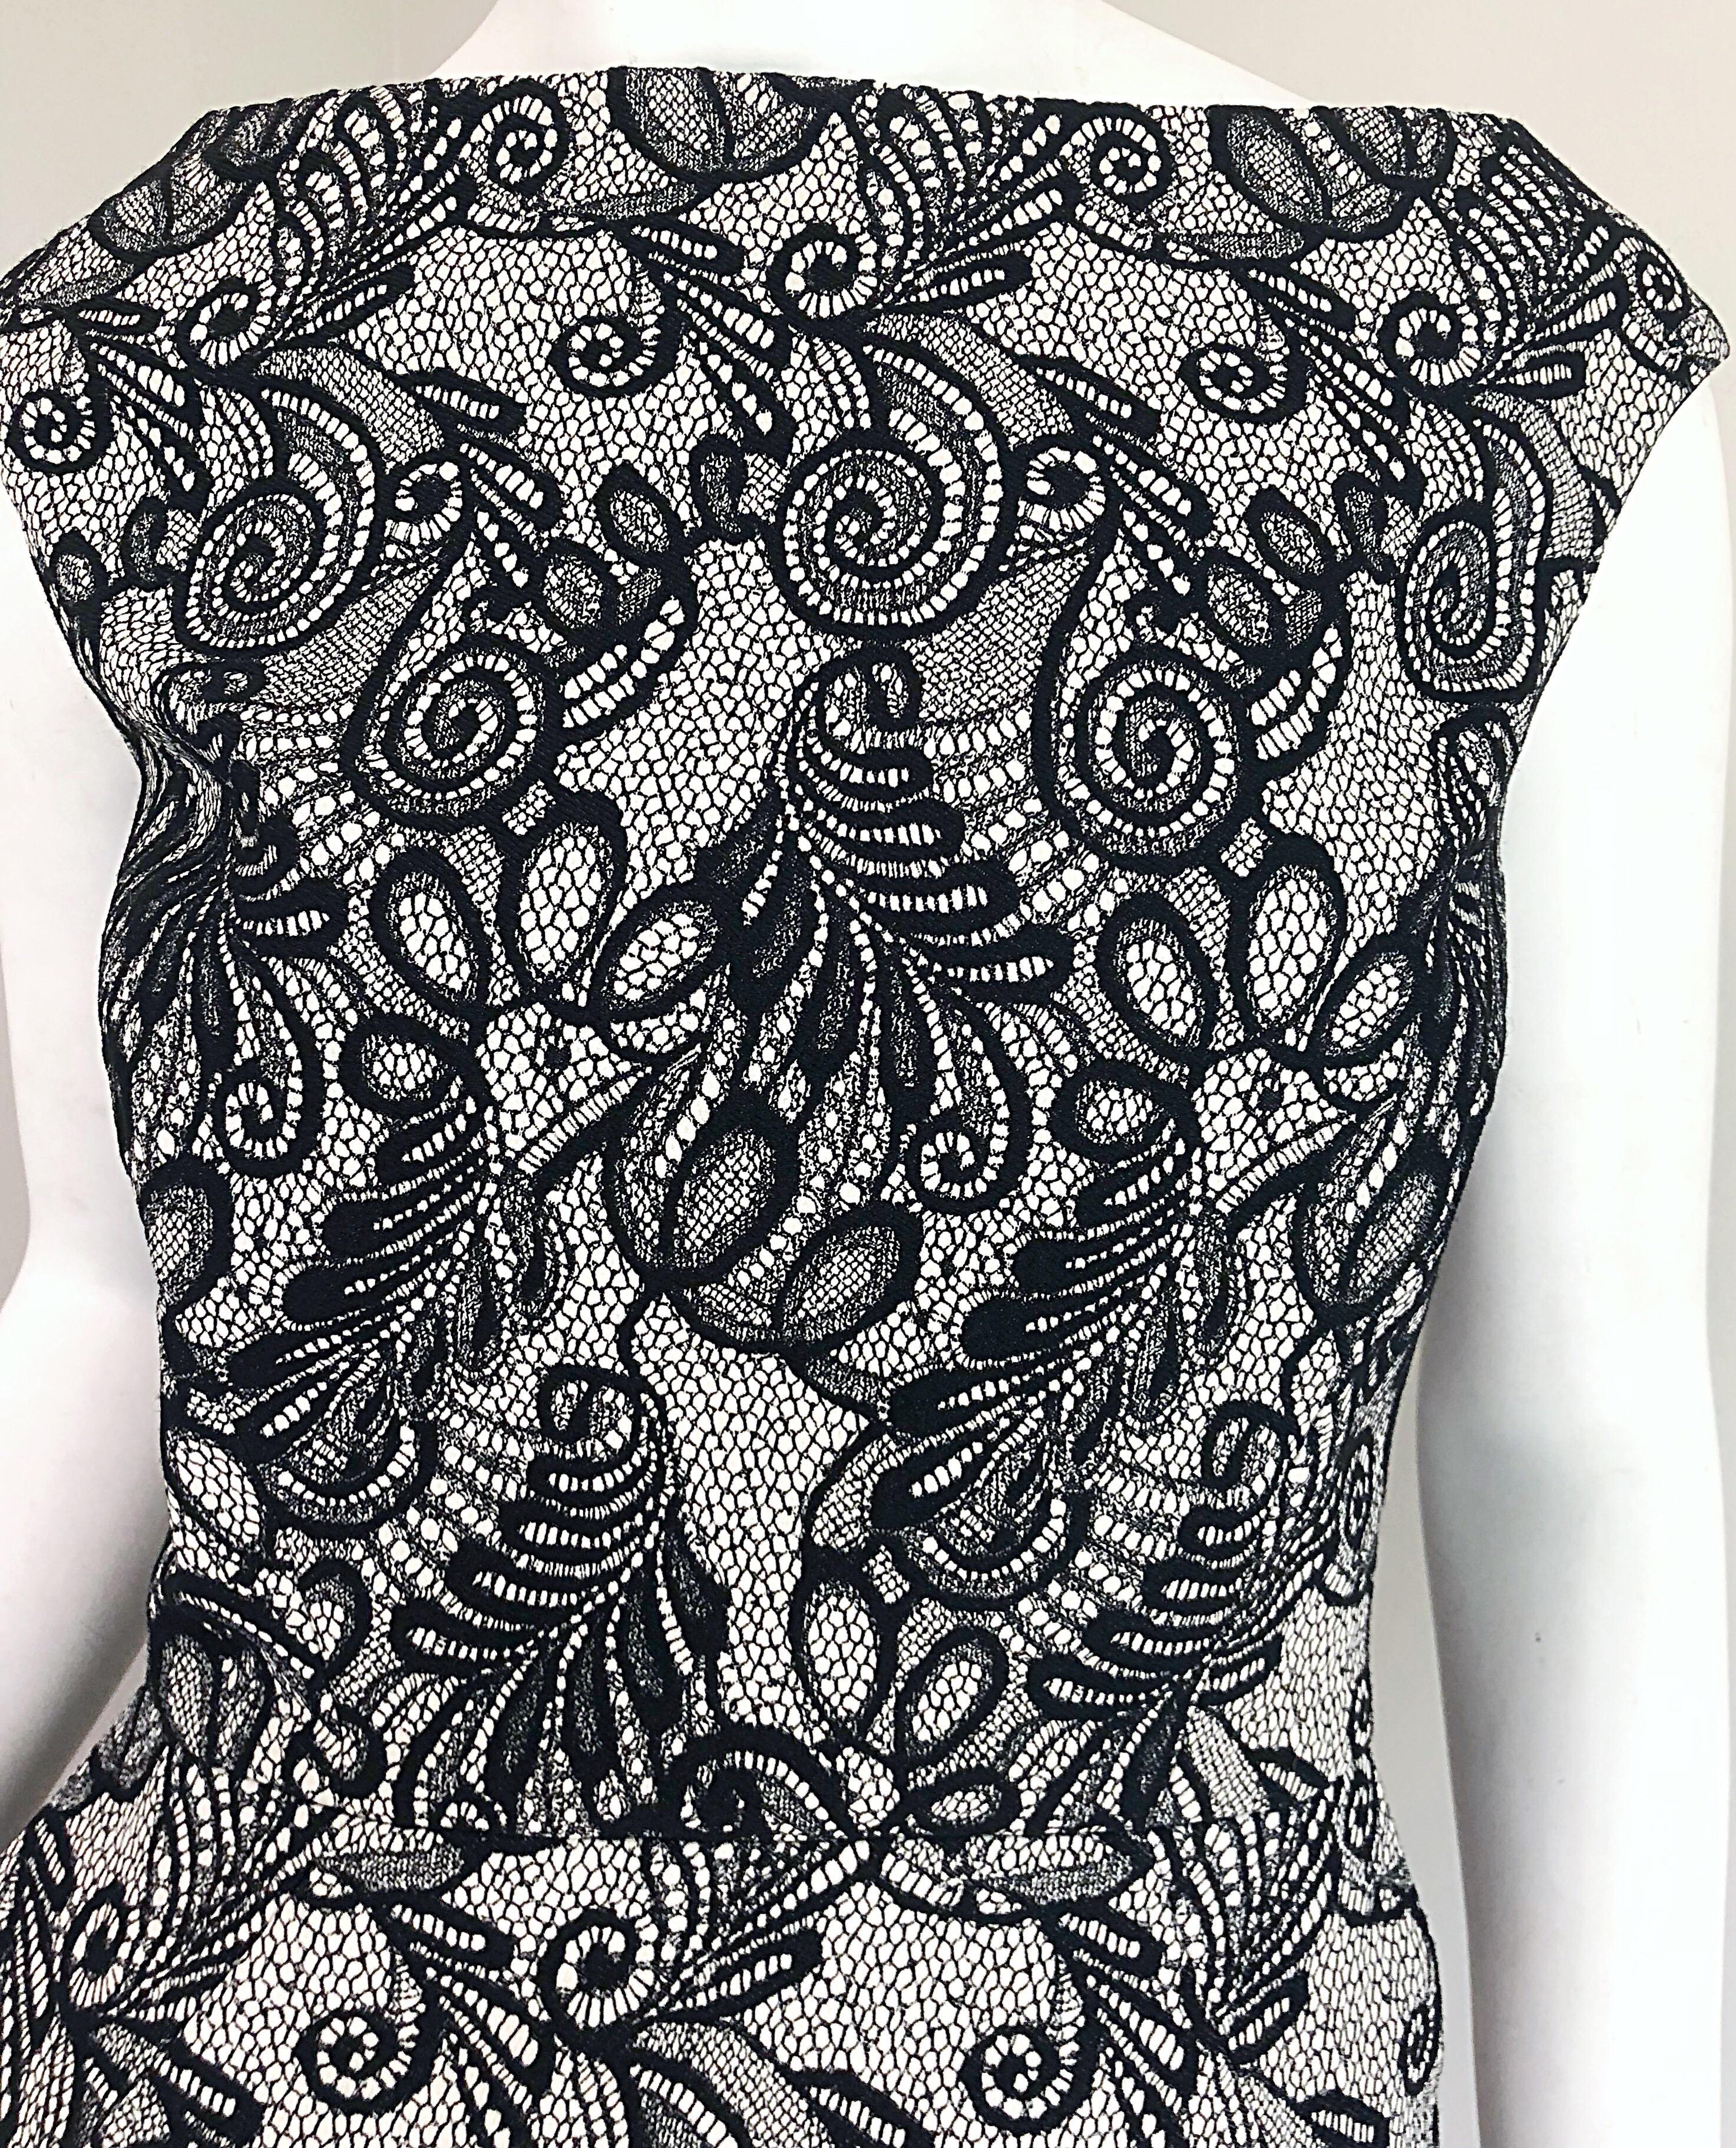 Elegant and rare early 2000s BILL BLASS by 
MICHAEL VOLLBRACHT black and white lace cocktail dress. 
This is an extra special piece, as Michael Vollbracht sadly passed away earlier last month. This is a prime example of his true talent!
Fitted